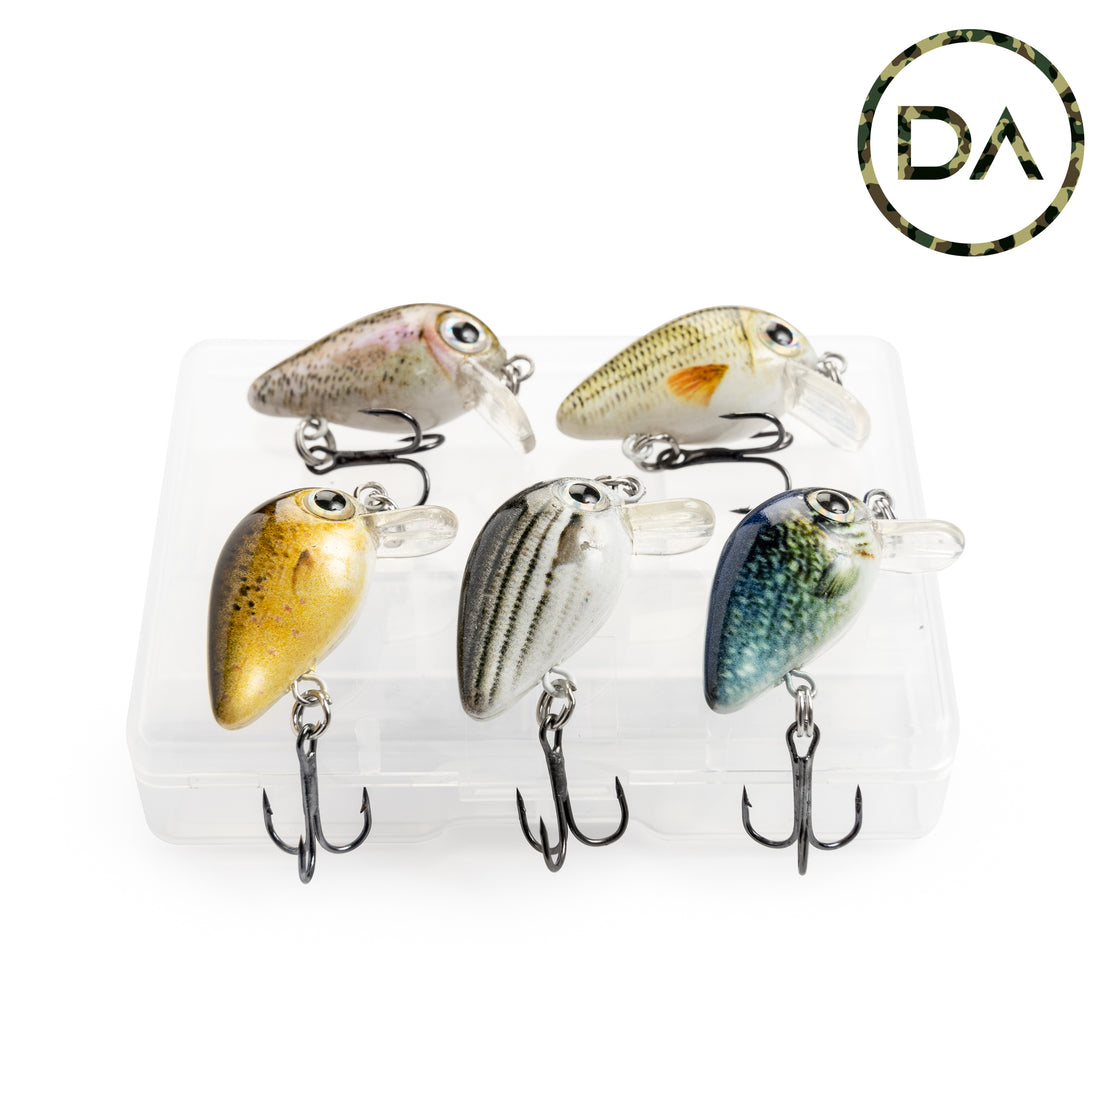 Micro Phantom Mixed Crankbait Floating Lure (28mm) - 5 Pack - Decoy Angling